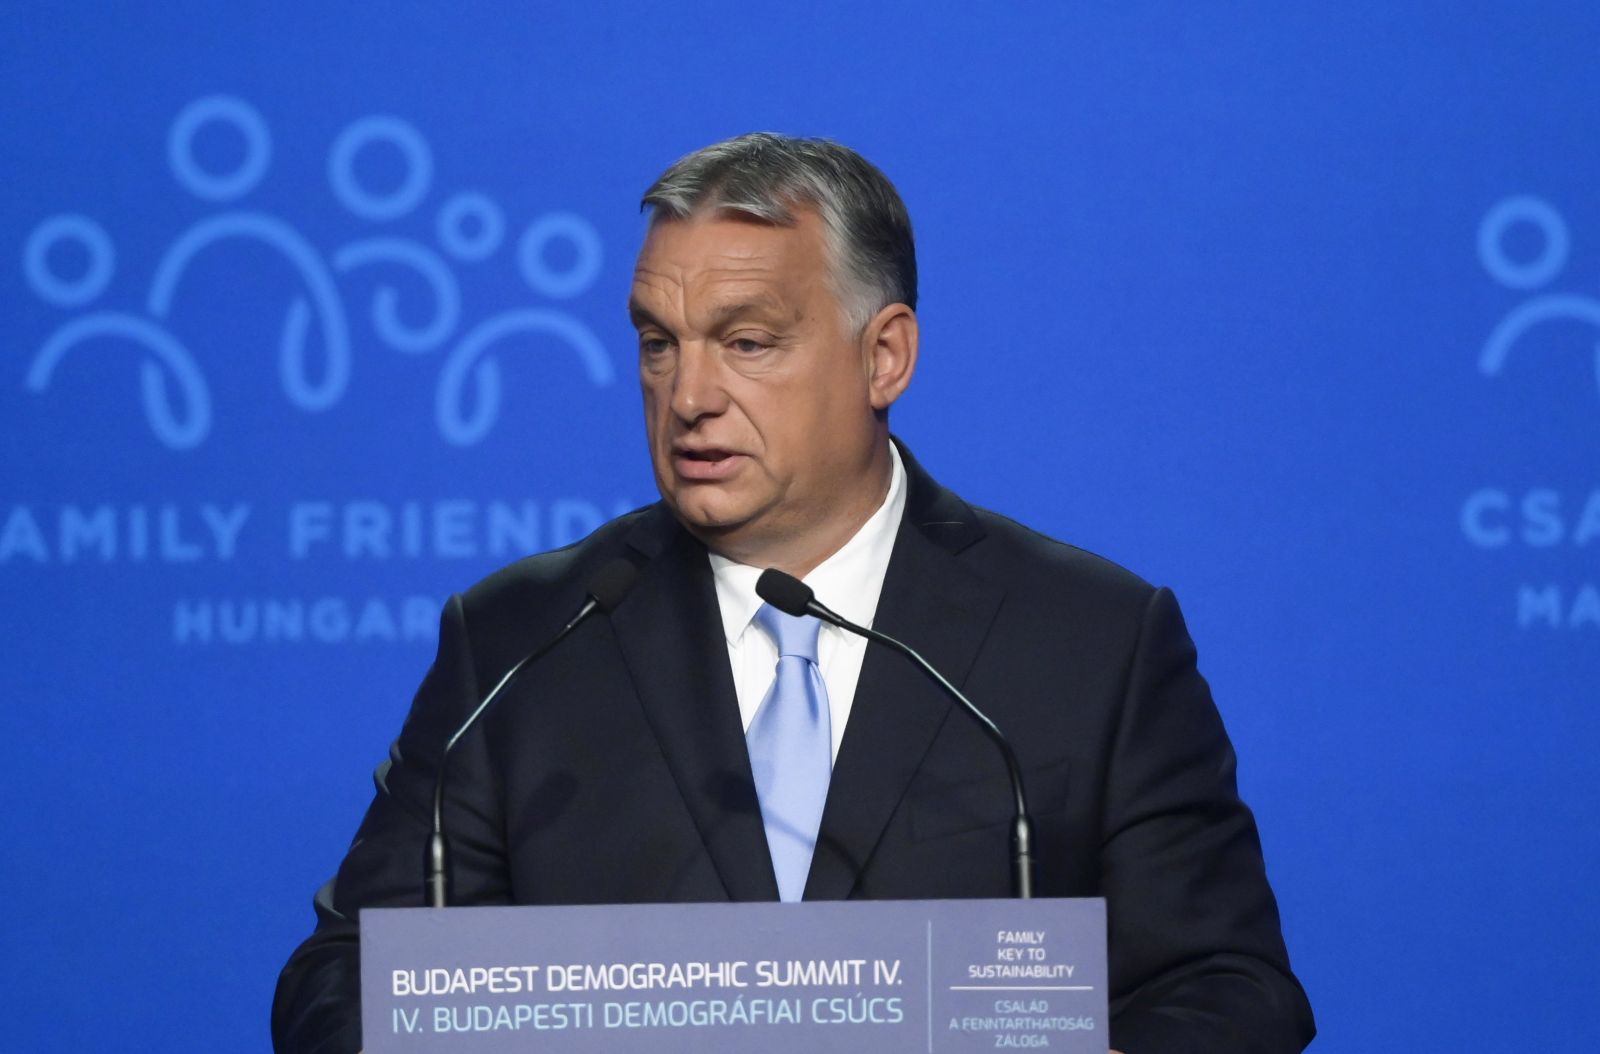 epa09483028 Hungarian Prime Minister Viktor Orban delivers a speech during the fourth Budapest Demographic Summit in Budapest, Hungary, 23 September 2021. The Budapest Demographic Summit, which was first organized in 2015, is a forum where politicians, church leaders, experts, representatives of the media, corporate sector and science, meet every two years. This year's summit, which runs on 23 and 24 September, is focusing on demography and sustainability.  EPA/SZILARD KOSZTICSAK HUNGARY OUT